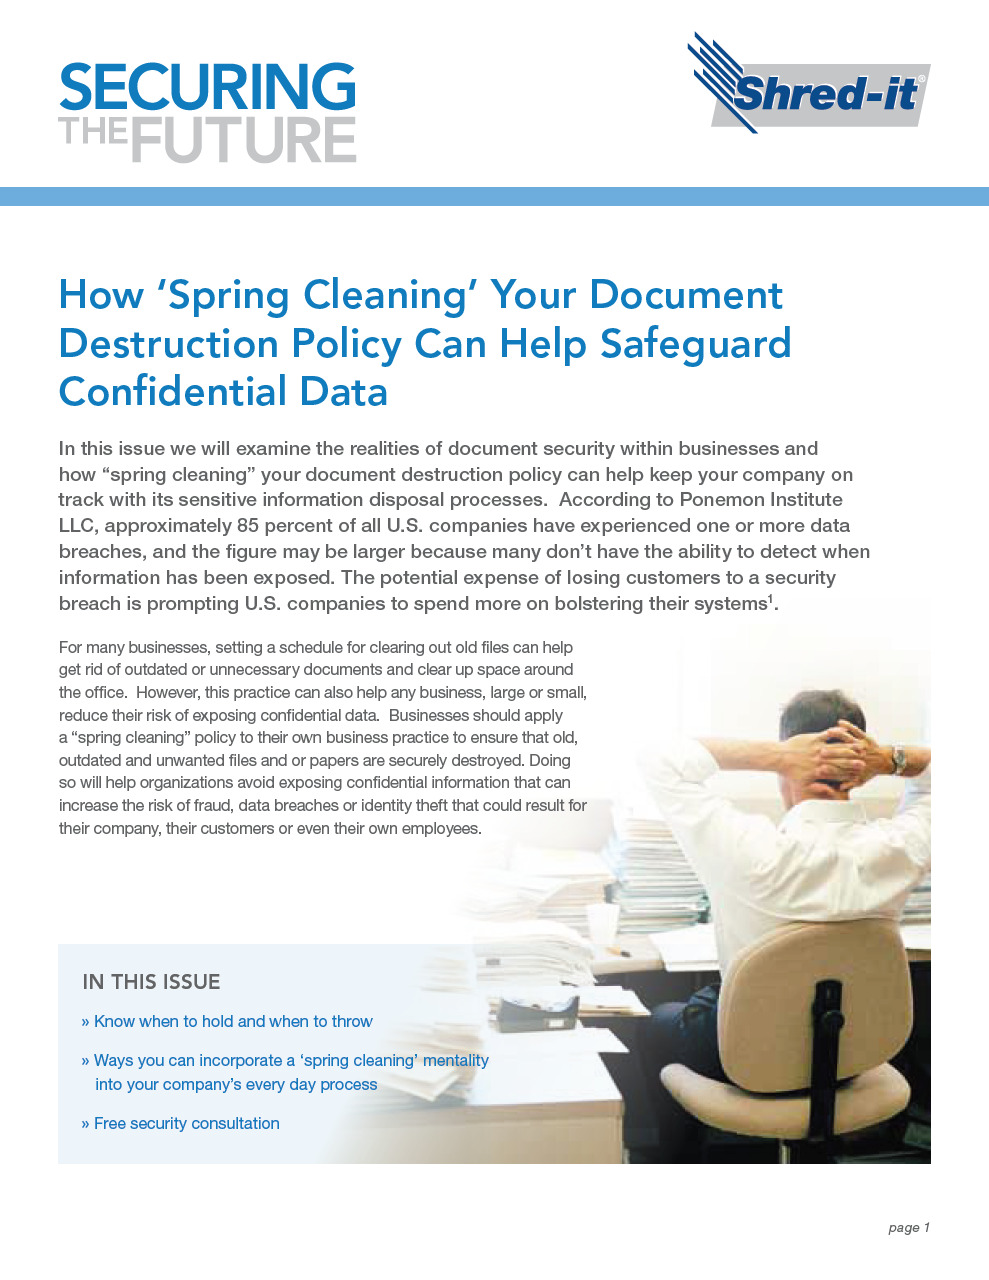 Shred-it_Newsletter_How-Spring-Cleaning-Your-Document-Destruction-Policy.pdf